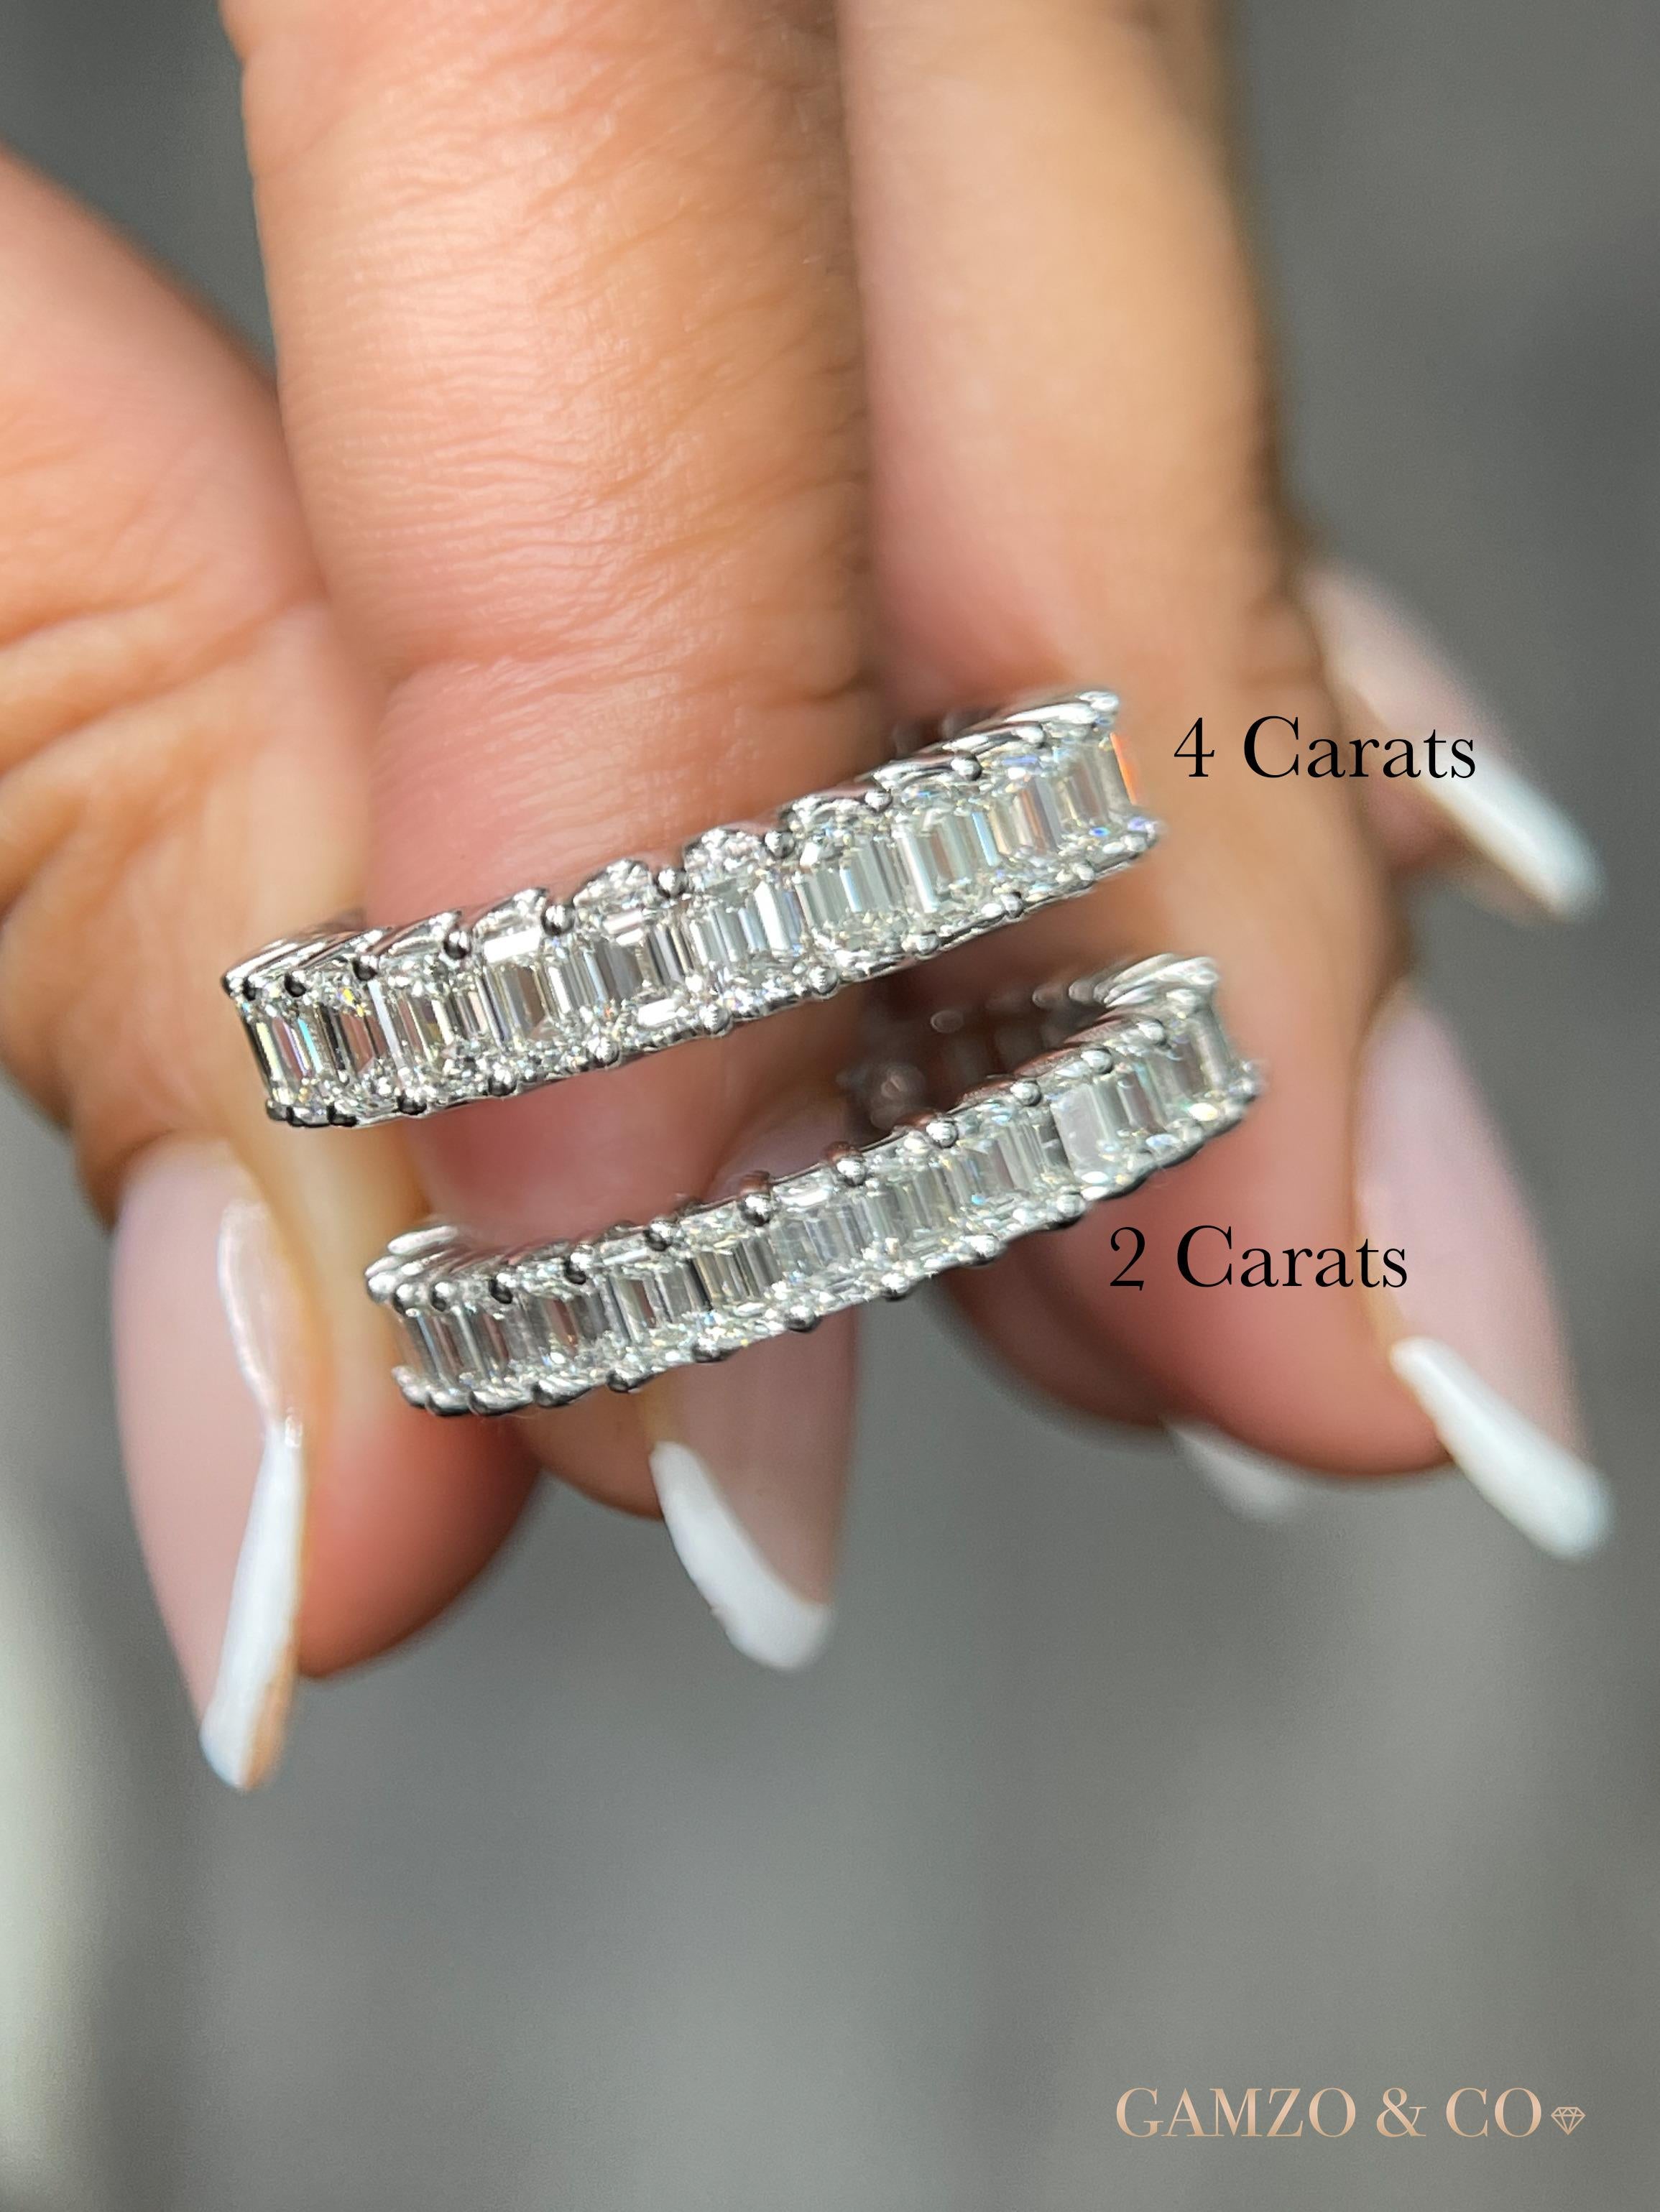 For Sale:  18k White Gold 4 Carat Natural Emerald Cut Diamond Eternity Ring 2